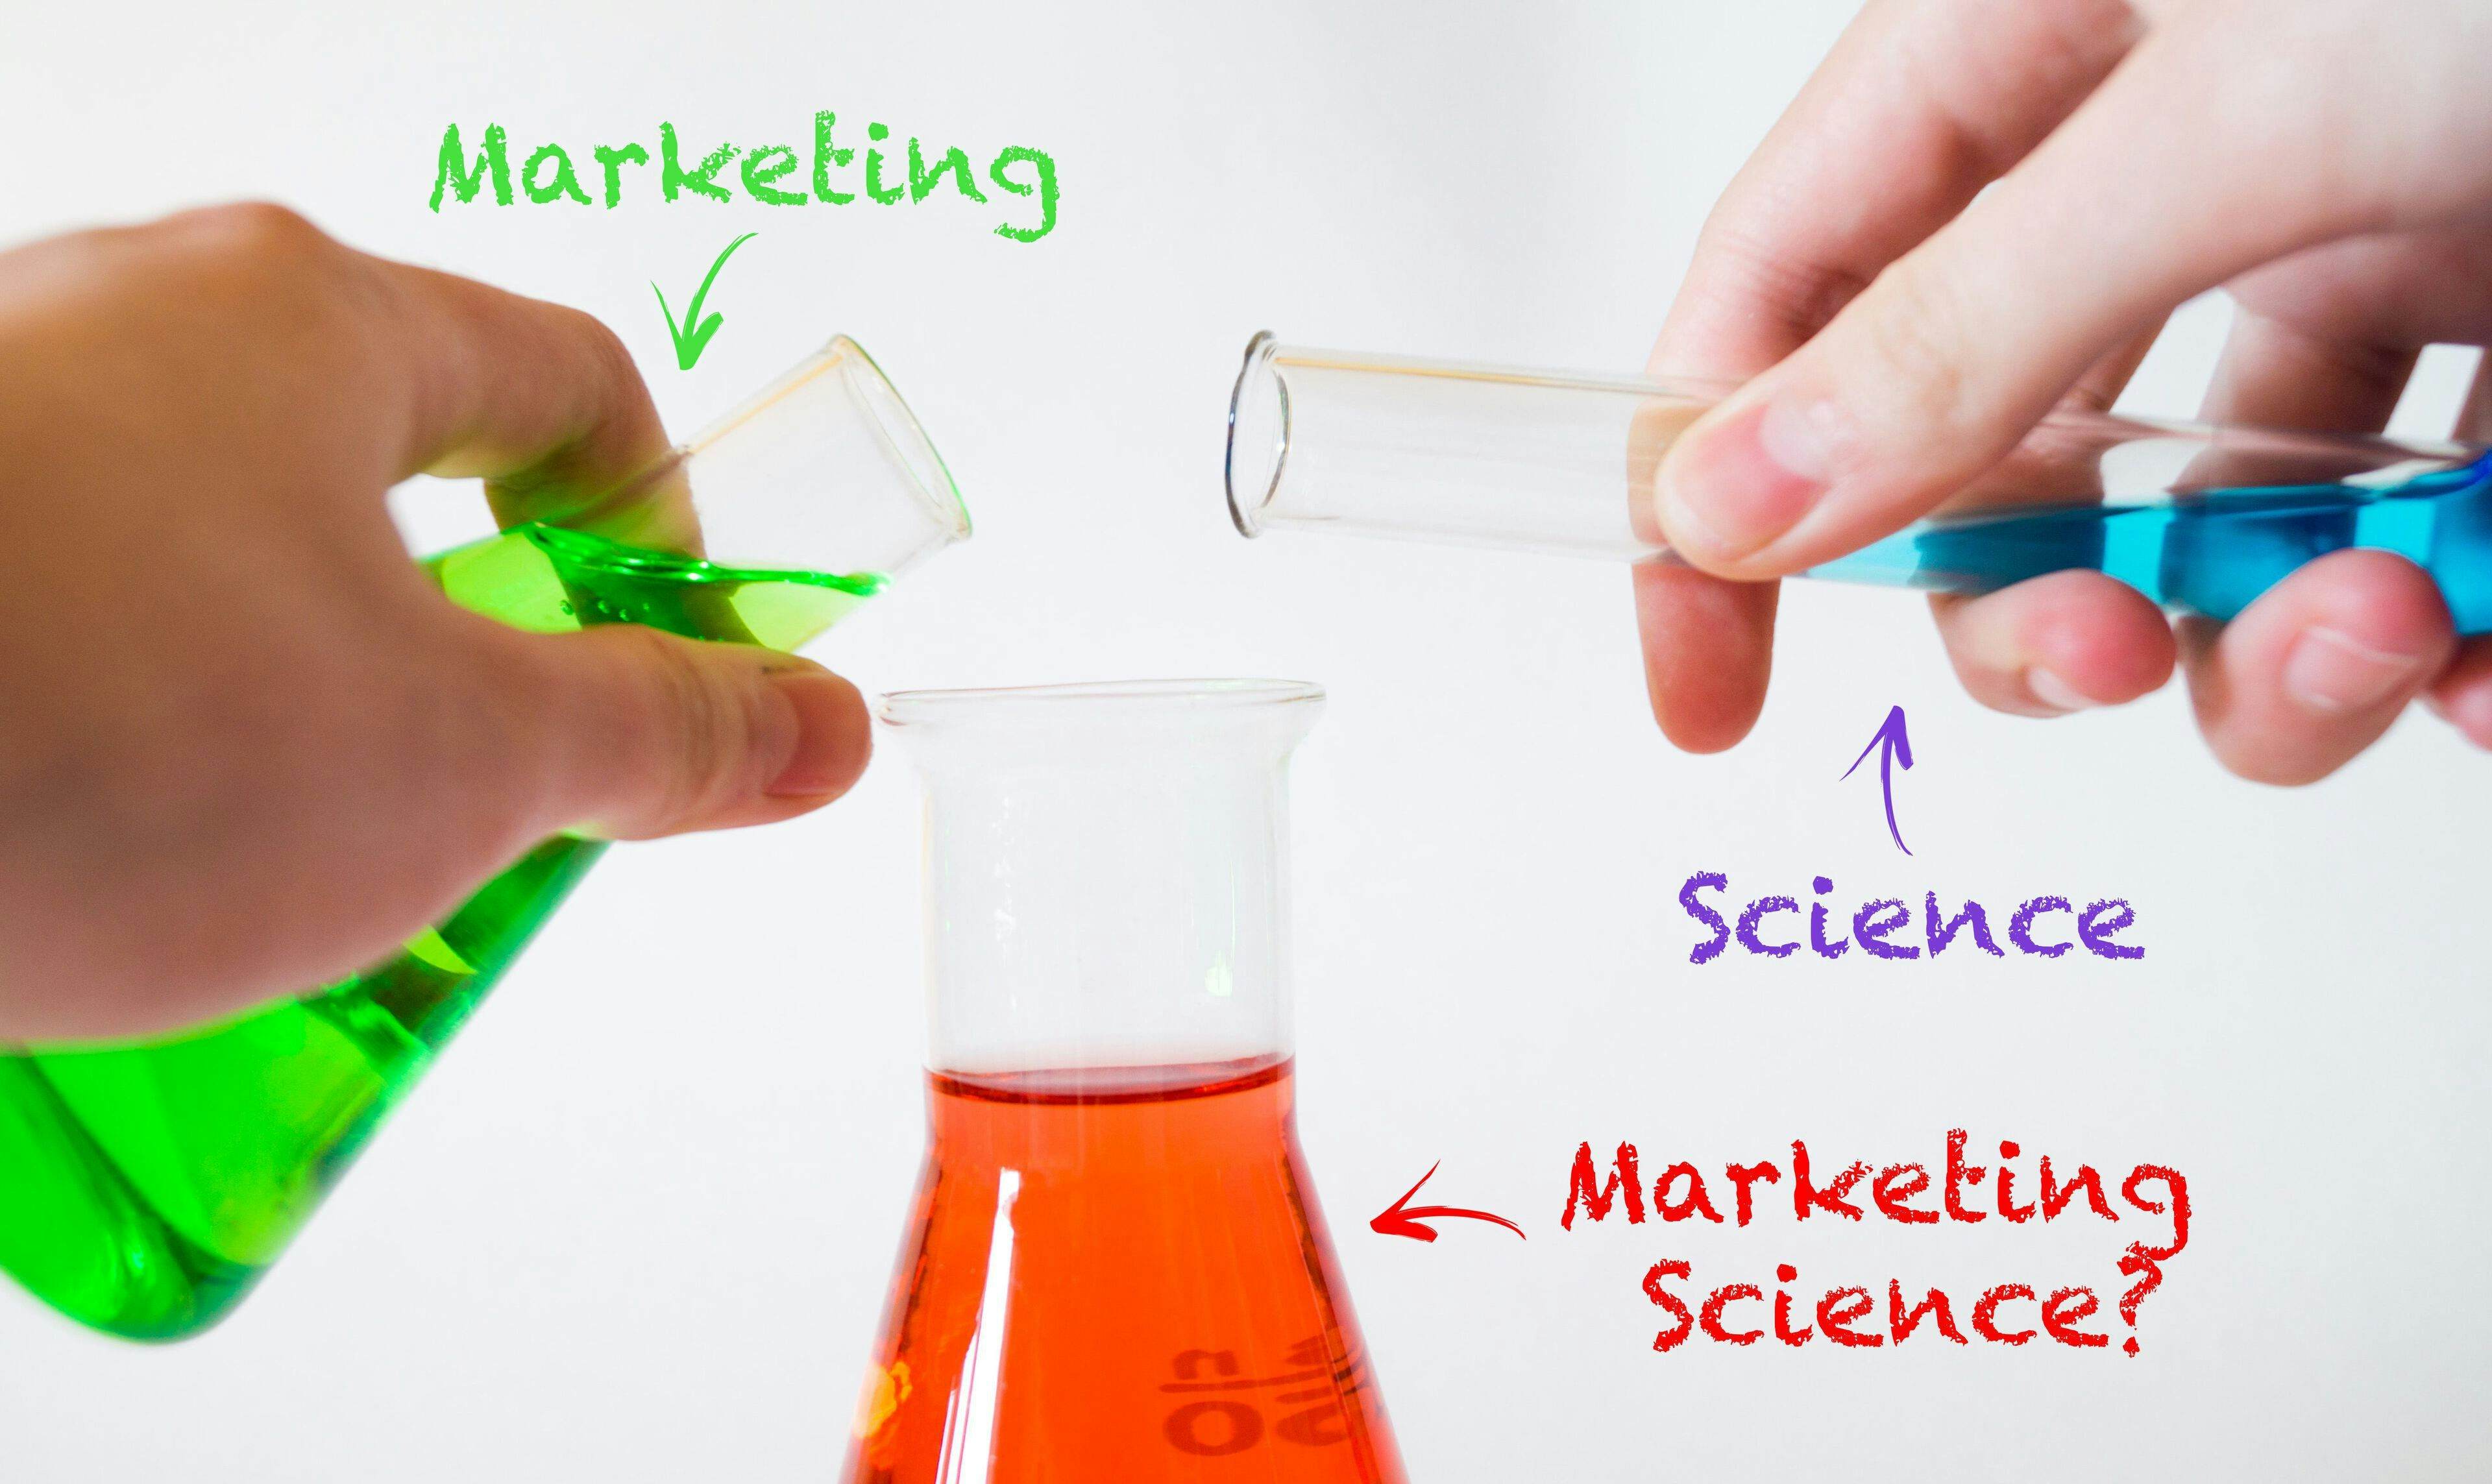 What is Marketing Science